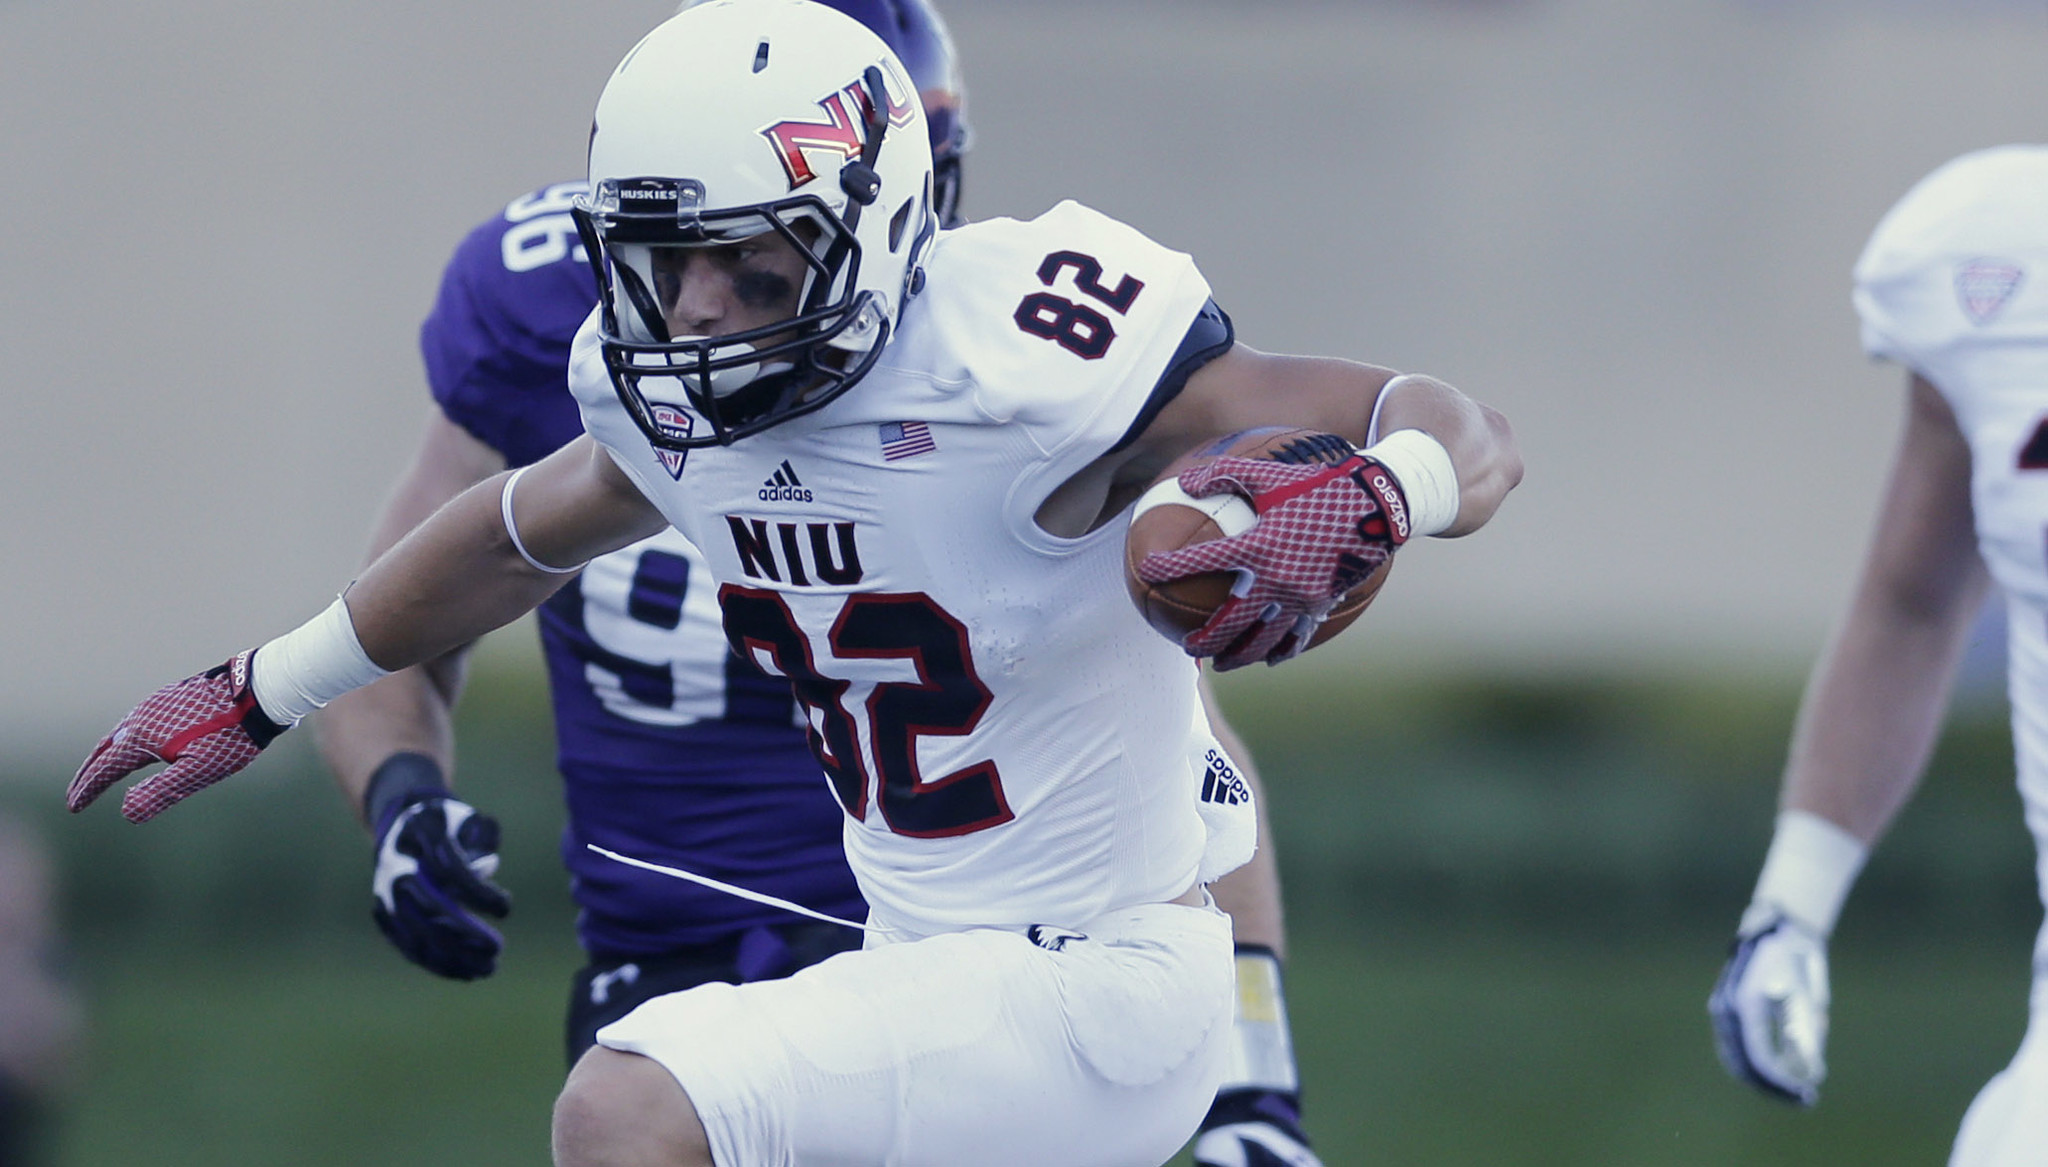 NIU receiver Chad Beebe back from injury, inspired by father's unlikely path - Chicago ...2048 x 1167